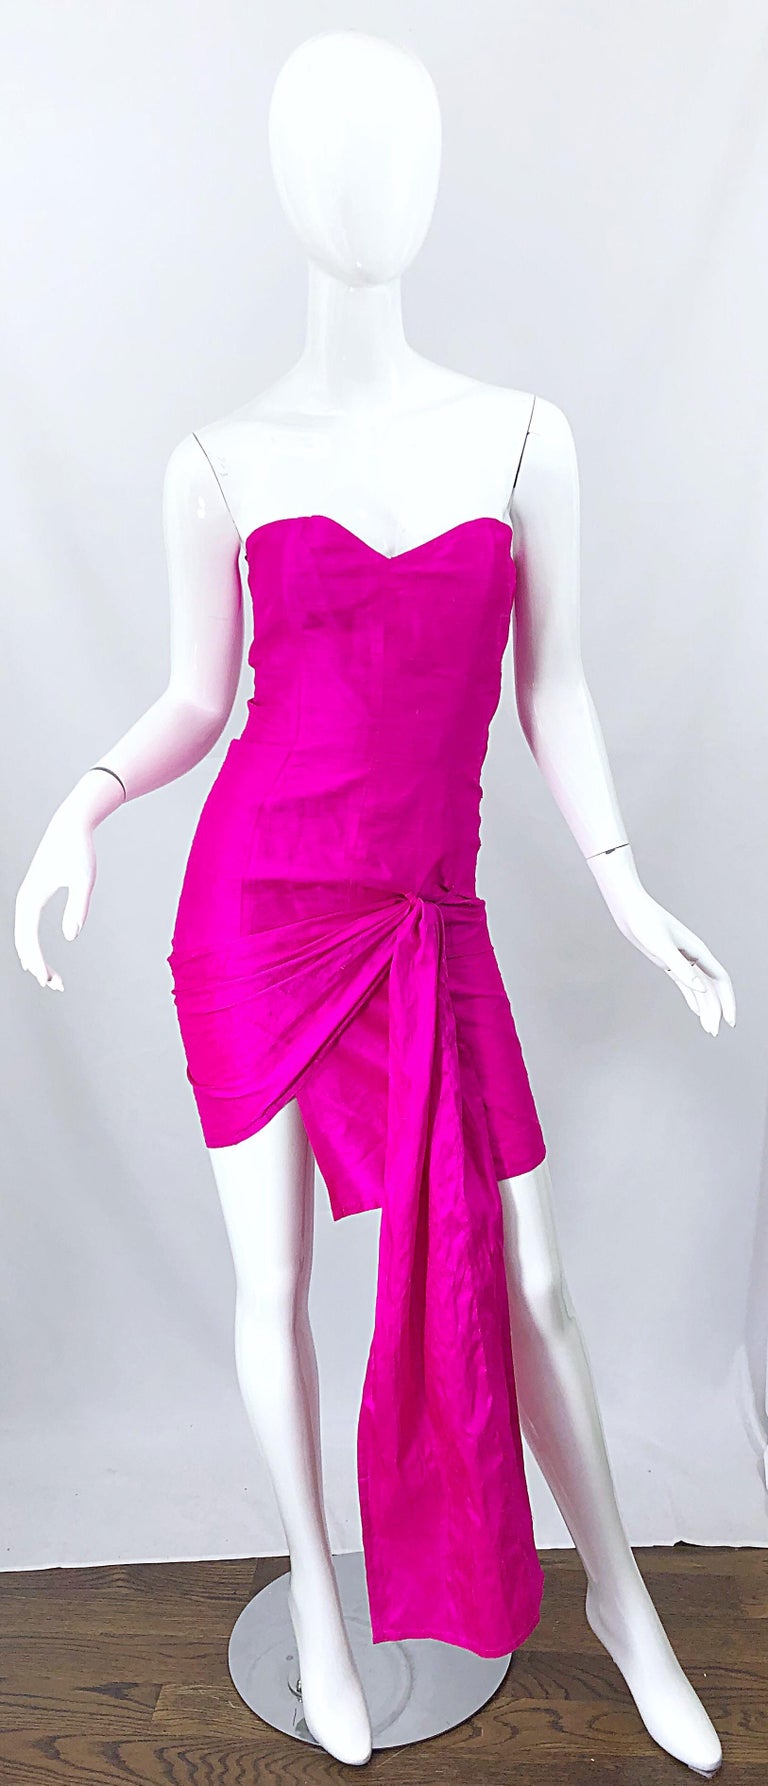 Avant Garde 80s vintage ANGELO TARLAZZI shocking hot pink silk shantung strapless dress! Features the perfect vibrant hot pink color on the finest silk shantung. Interior boning on bodice holds everything in place. Sash at hips runs through a loop.